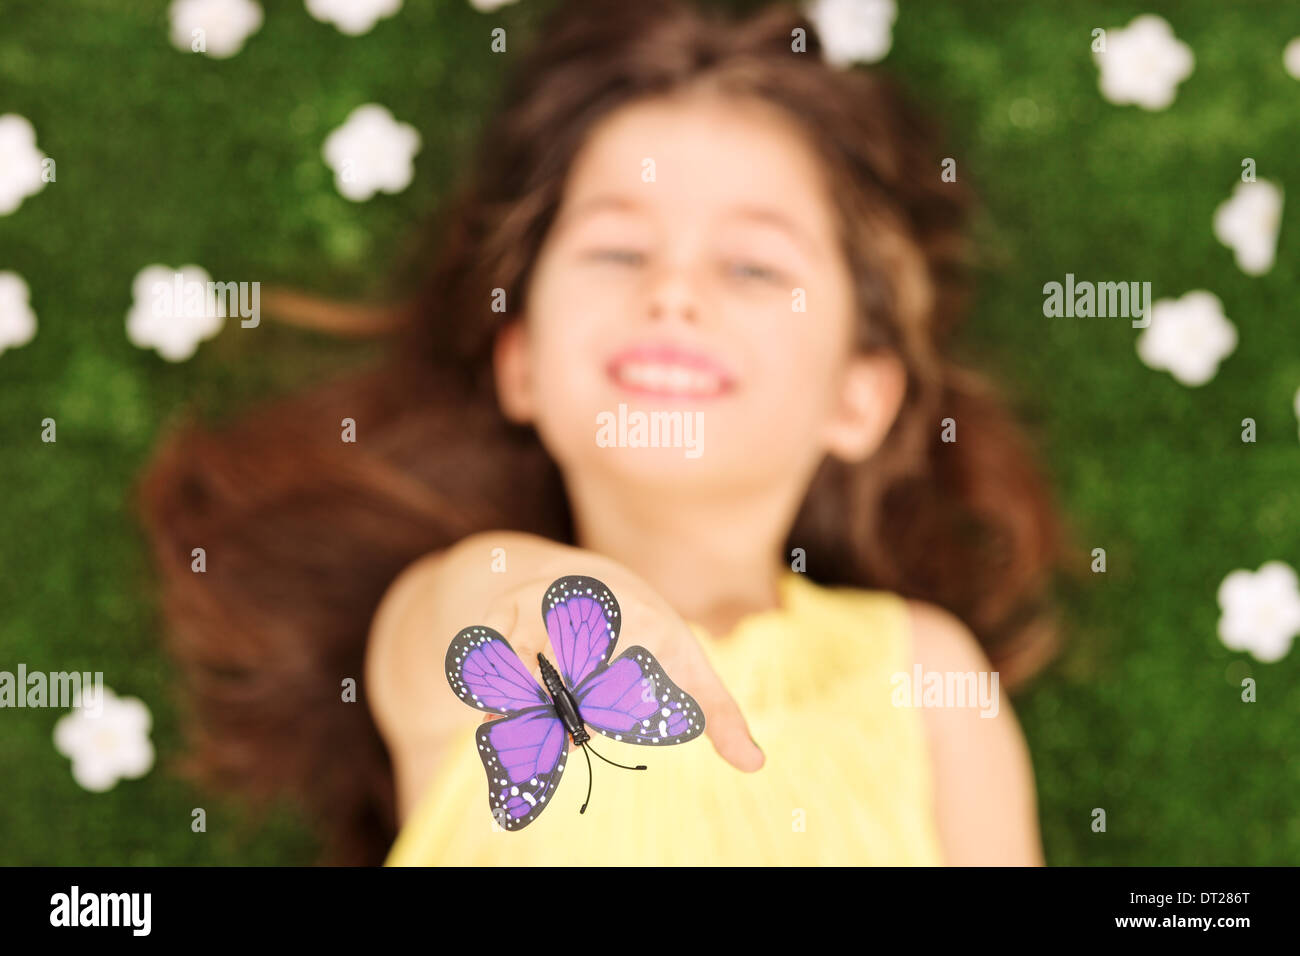 Blurred photo of little girl laying in meadow with flowers and reaching her hand to touch a purple butterfly Stock Photo